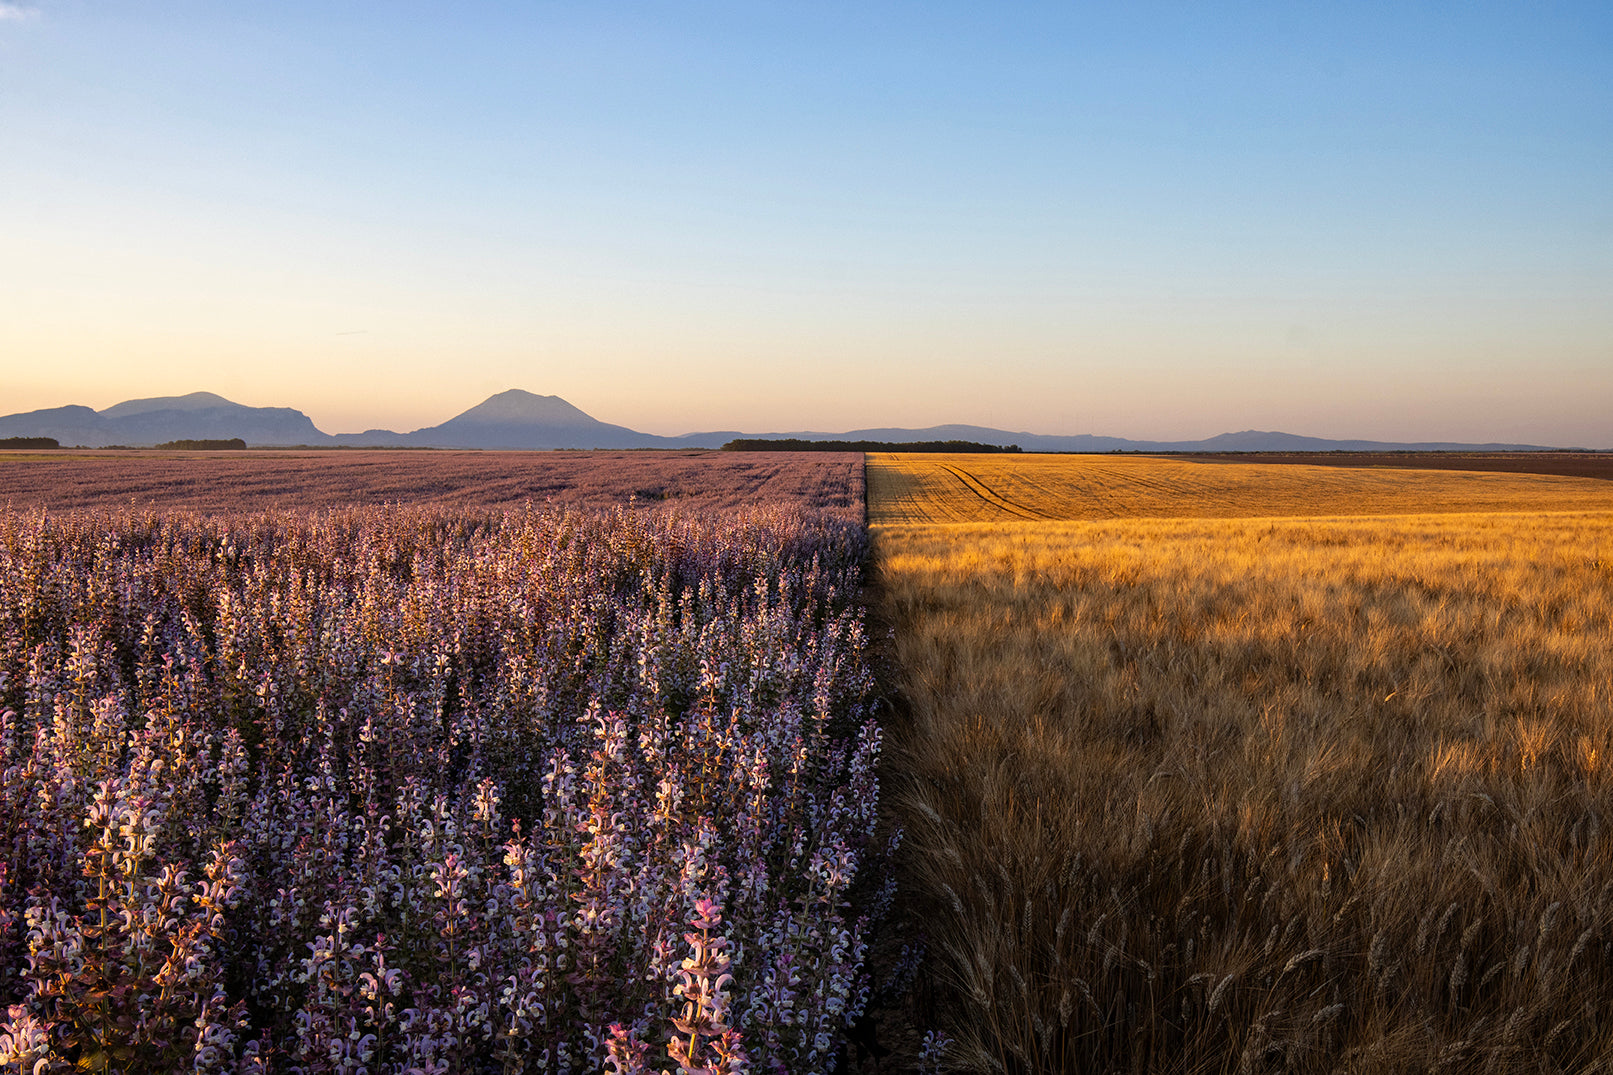 Clary Salvia (sage) and Barley Fields on the Plateau de Valensole in Provence, France.